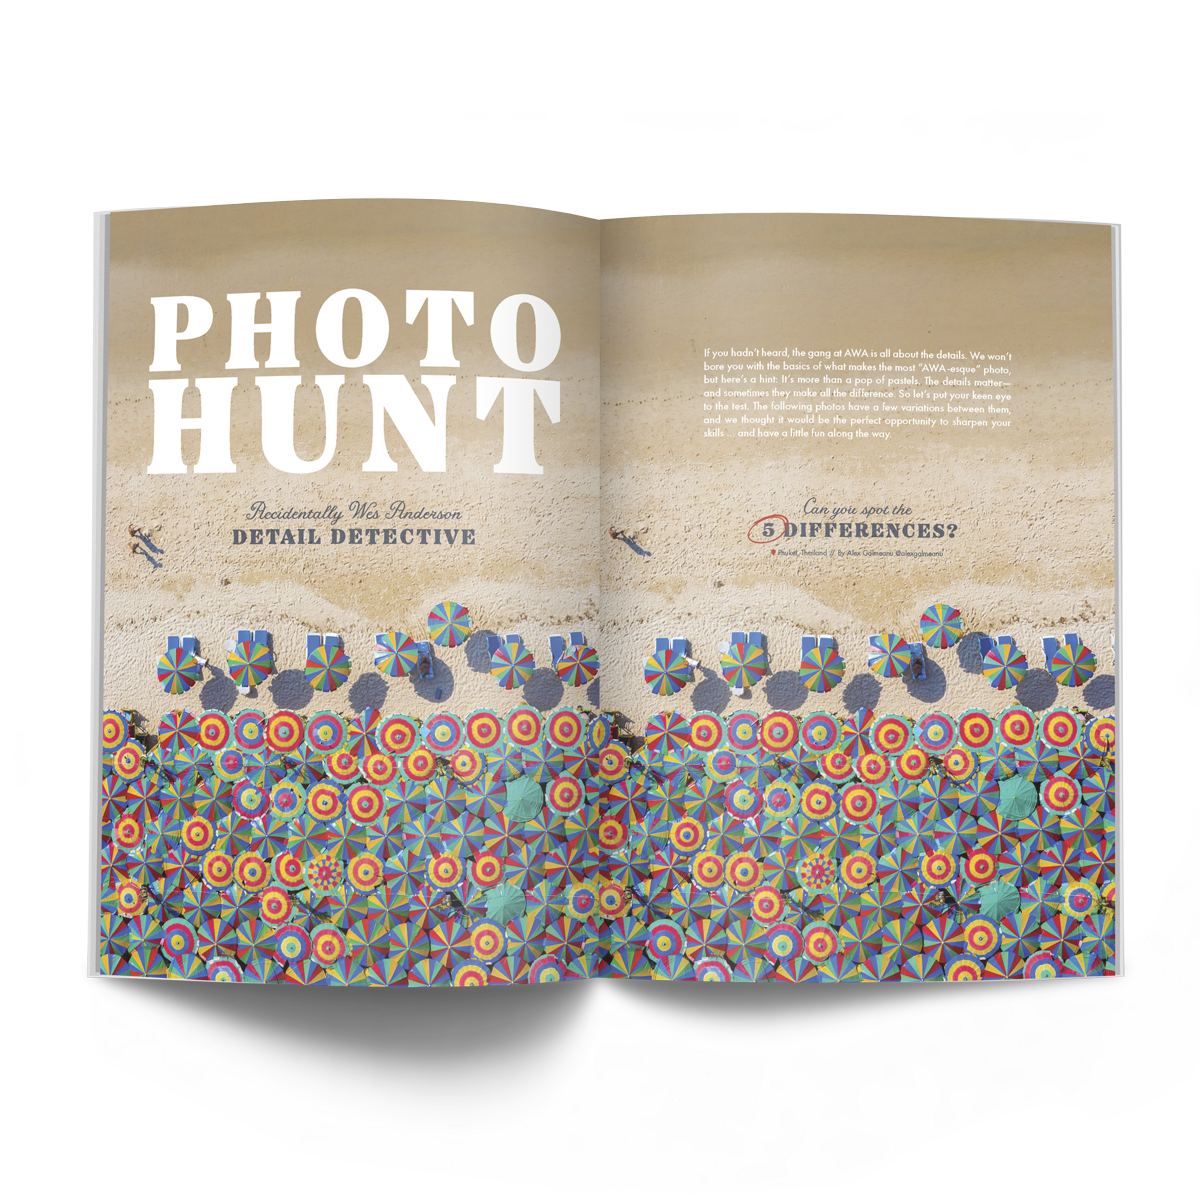 THE PHOTO ISSUE: VOLUME 8 – ISSUE 2